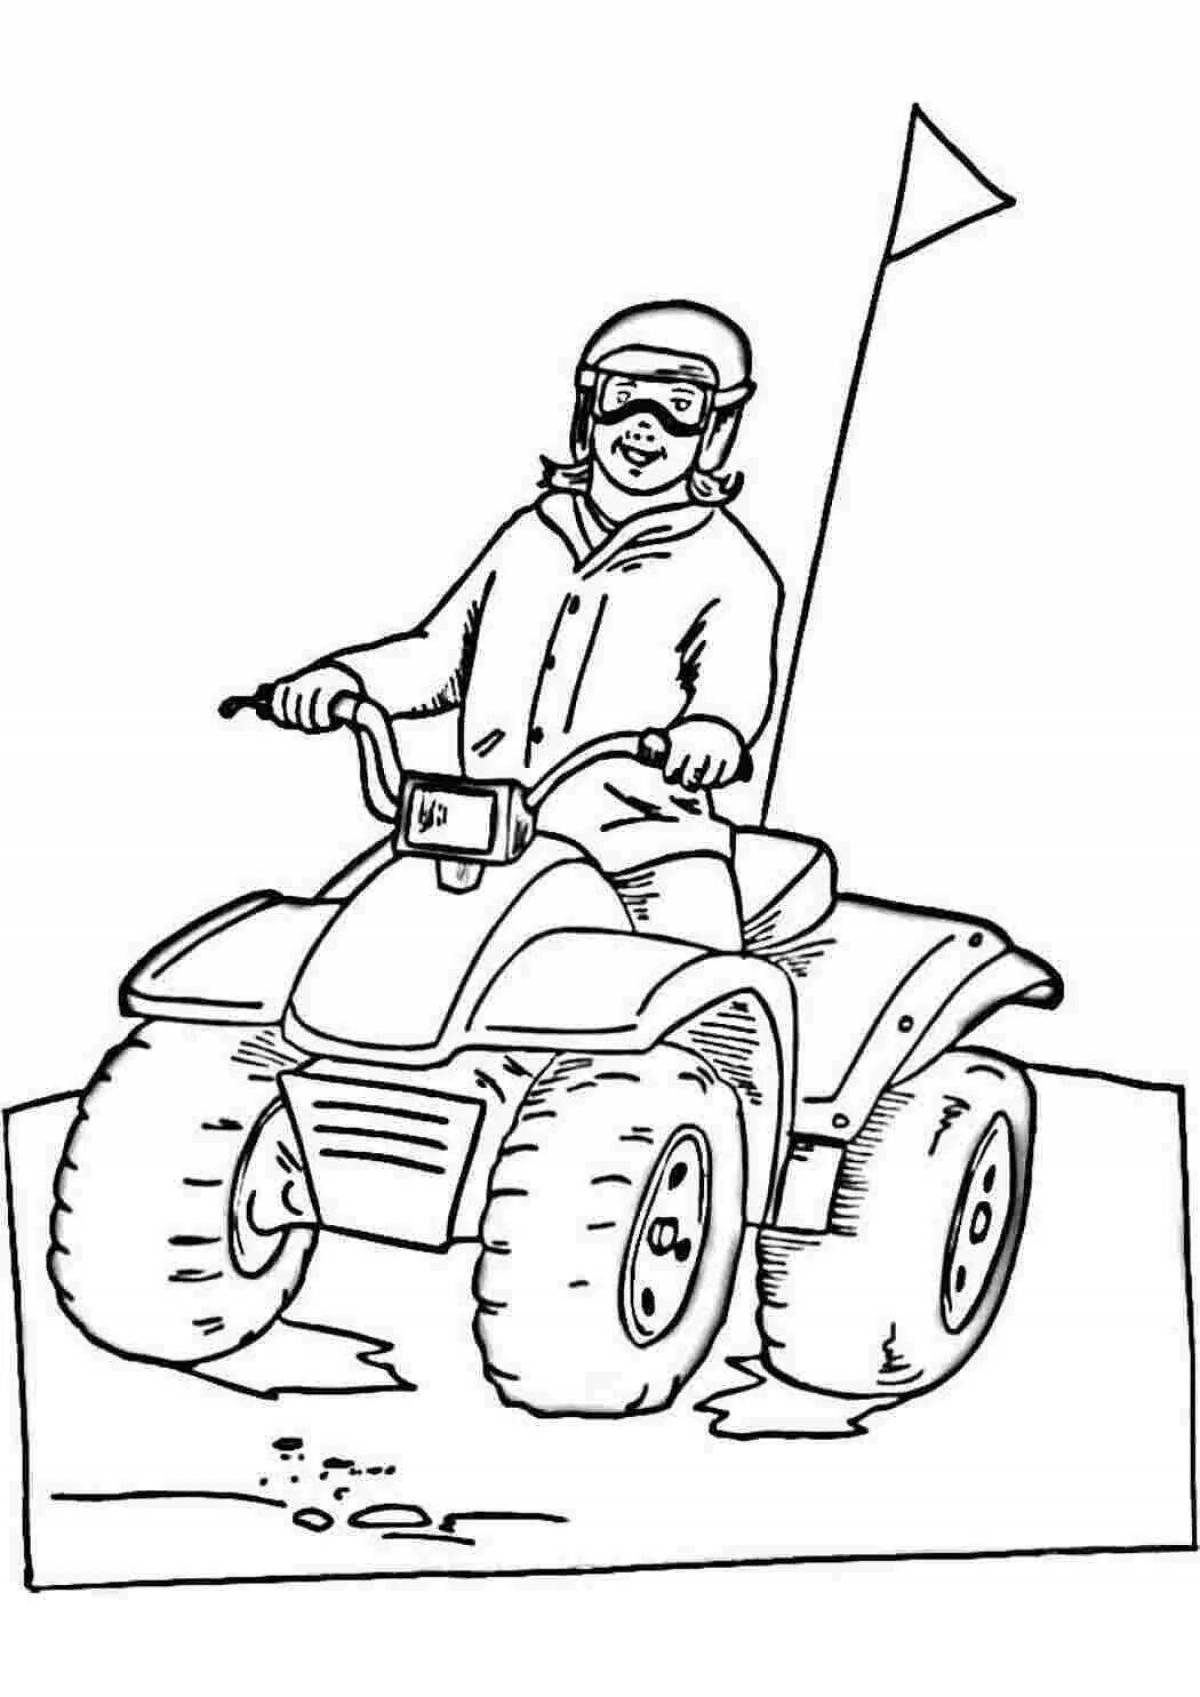 Outstanding coloring book for kids on quad bikes